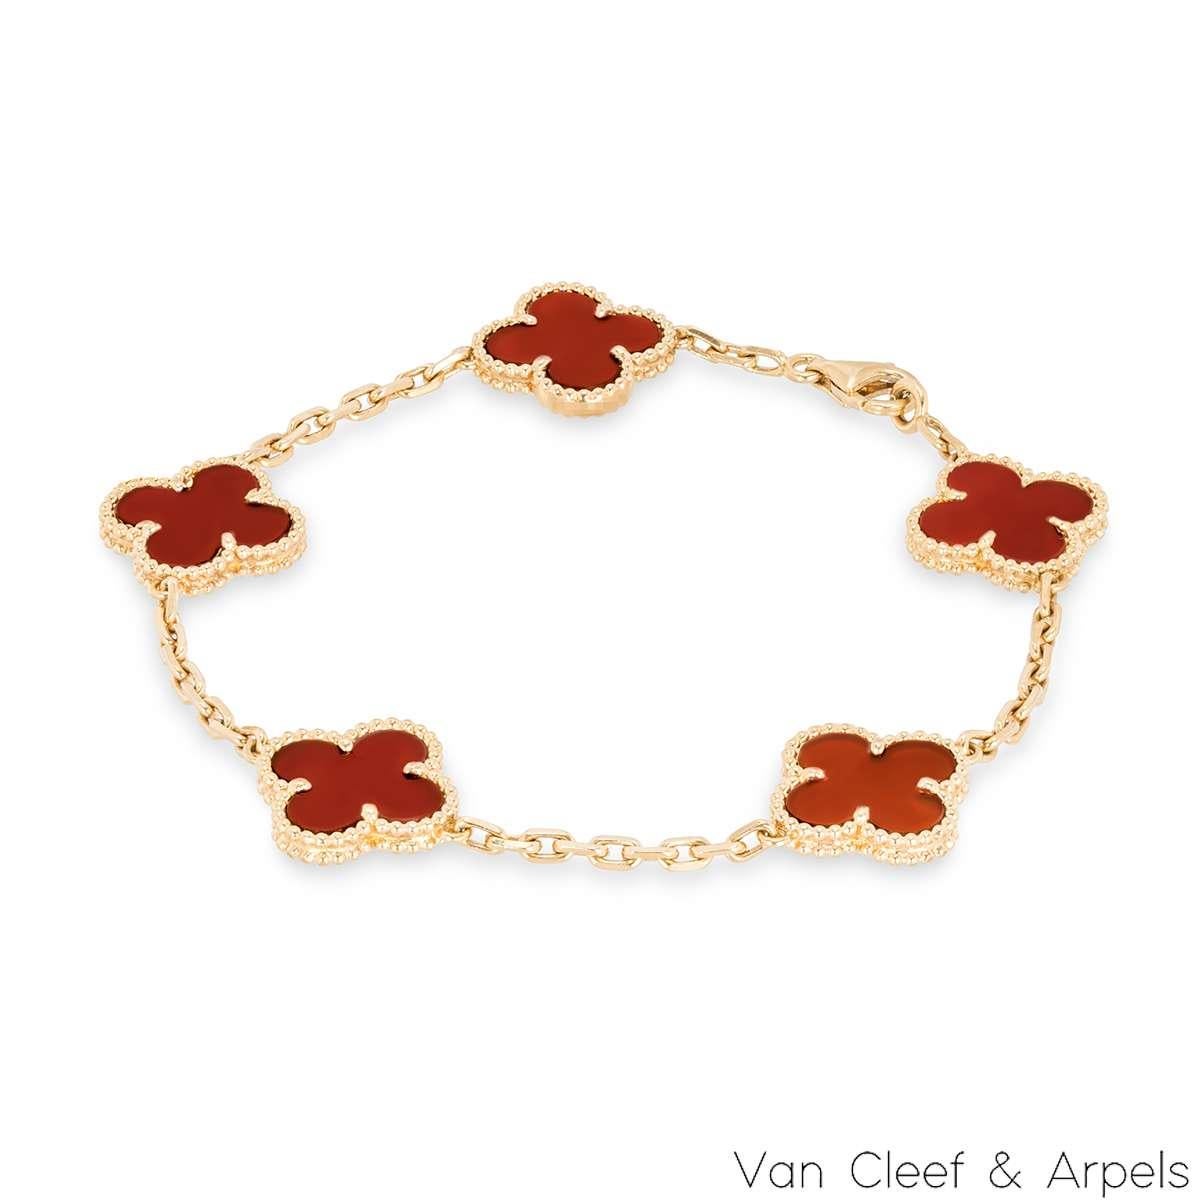 A lovely 18k yellow gold carnelian bracelet from the Vintage Alhambra collection by Van Cleef & Arpels. The bracelet features 5 iconic clover motifs, each set with a beaded edge and a carnelian inlay, set throughout the length of the chain. The